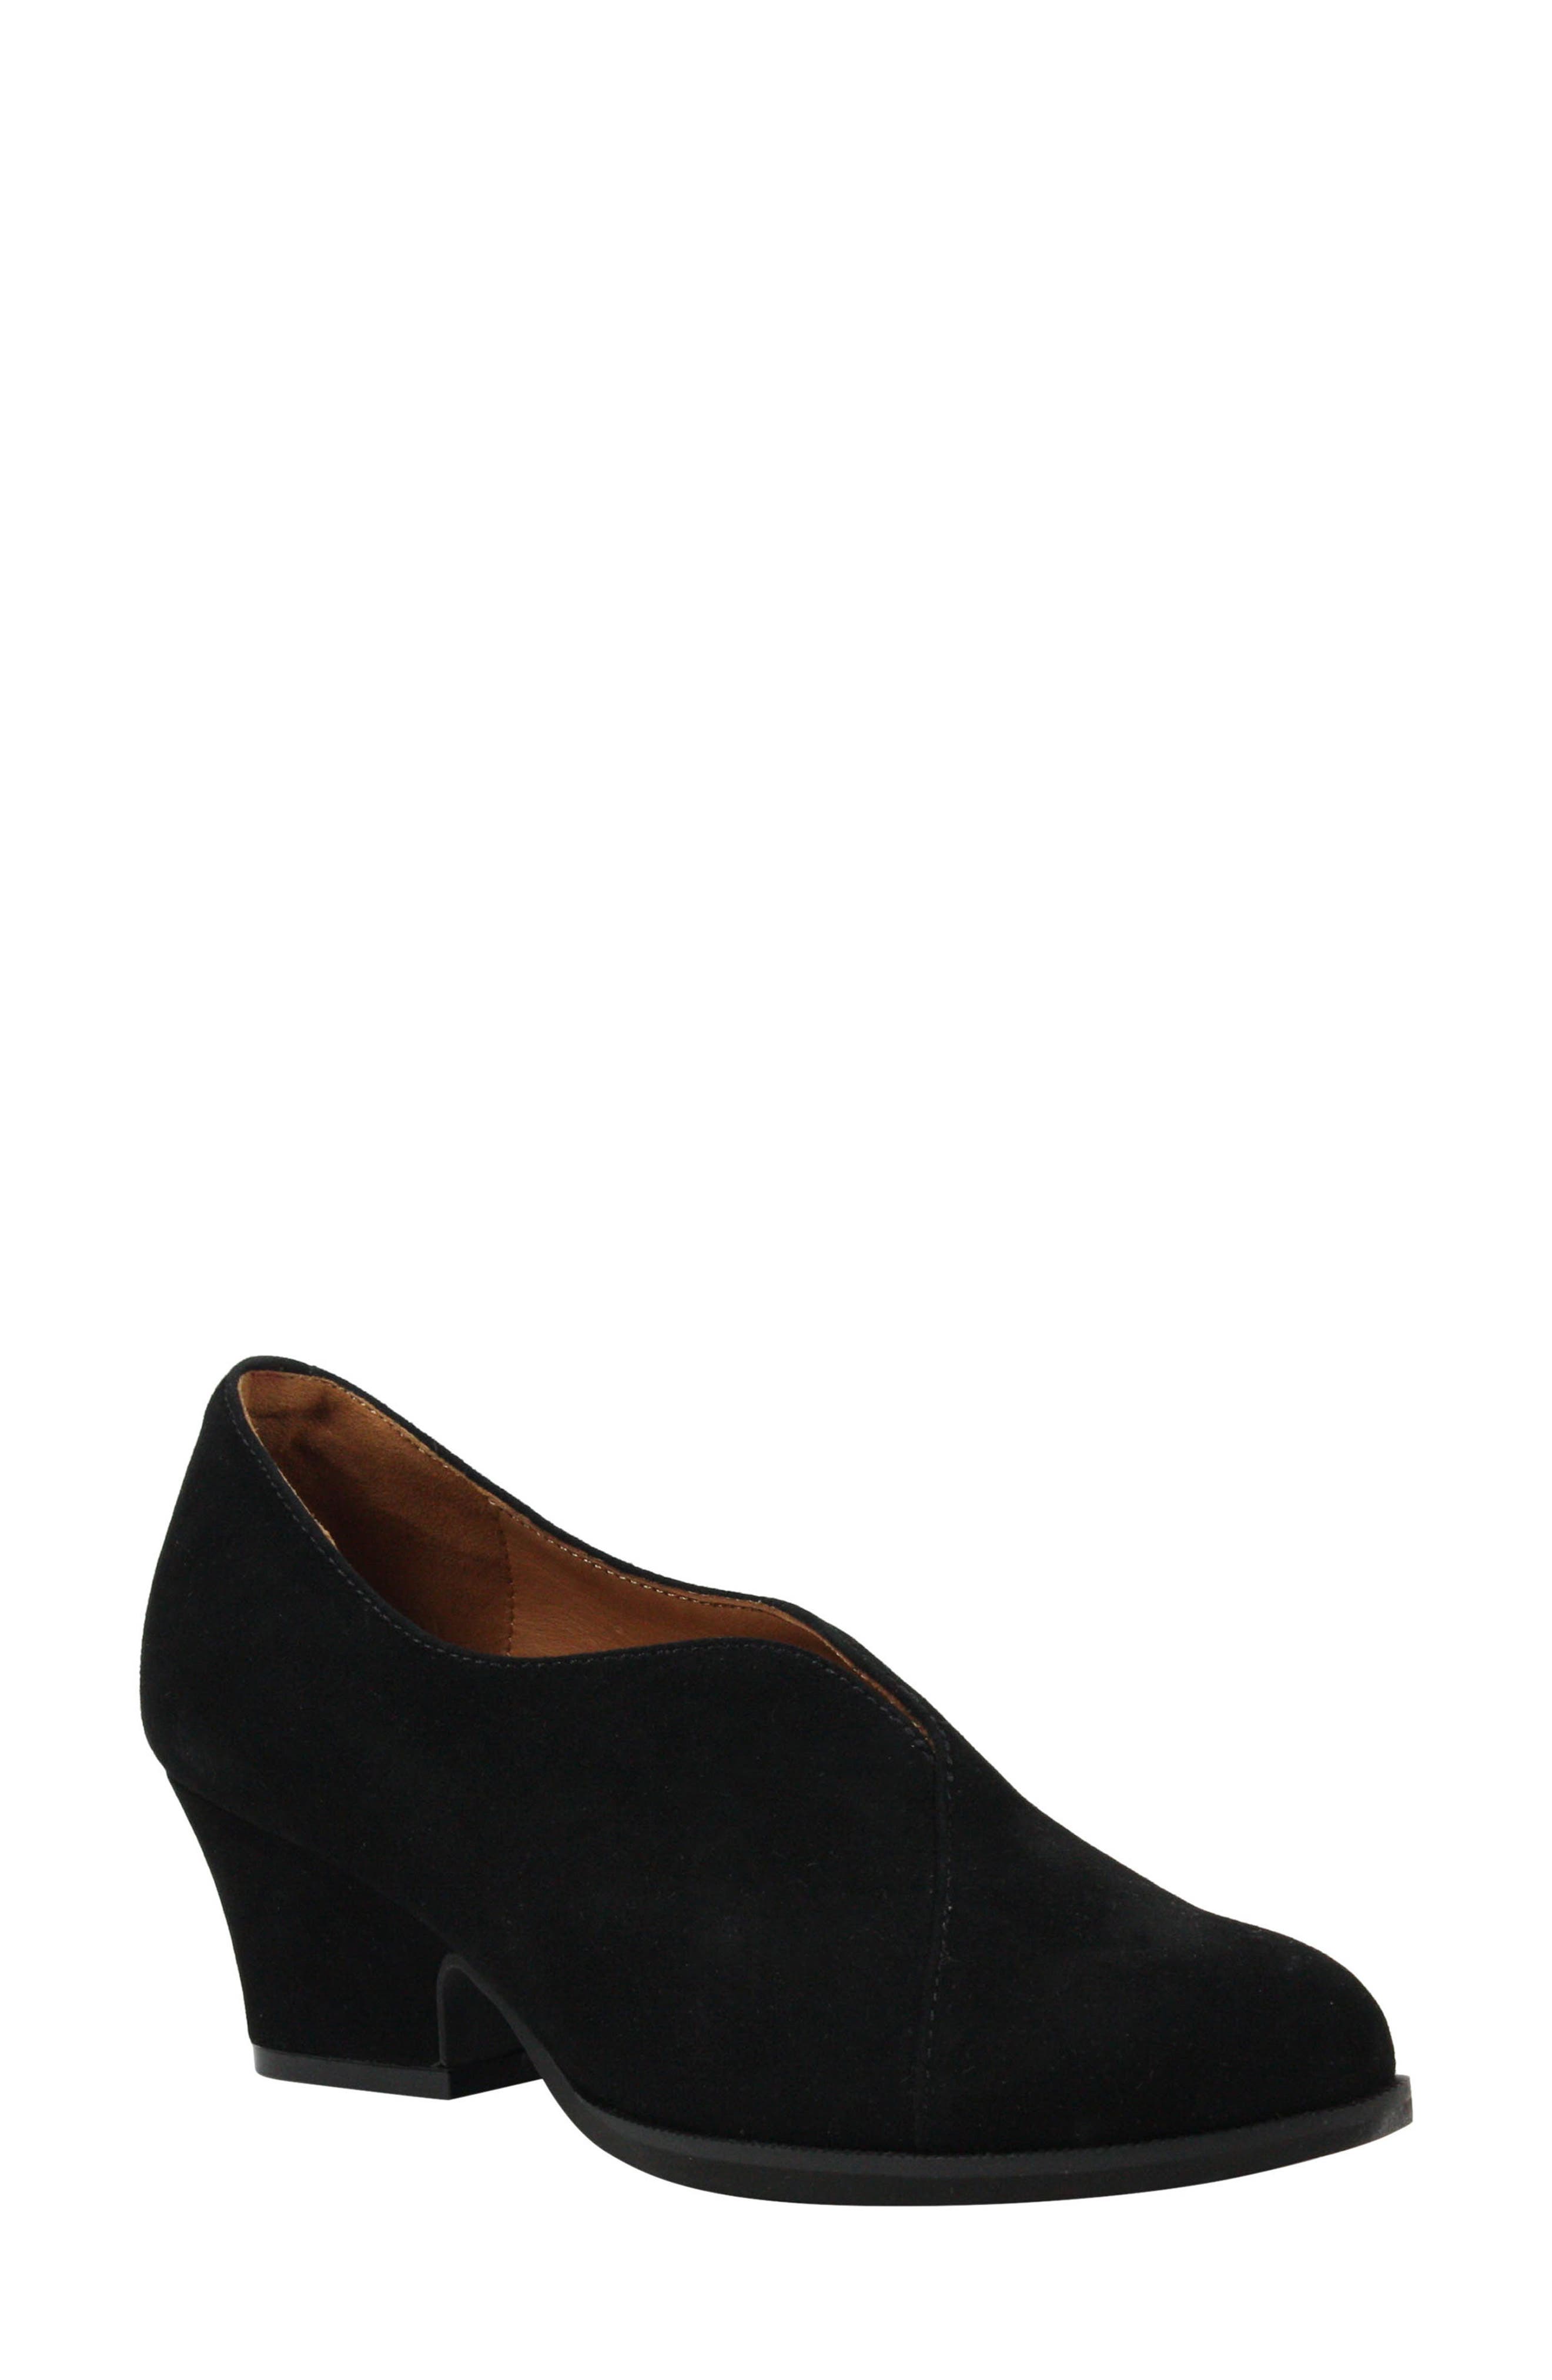 LAmour des Pieds Womens Bernyce Pull on Bootie